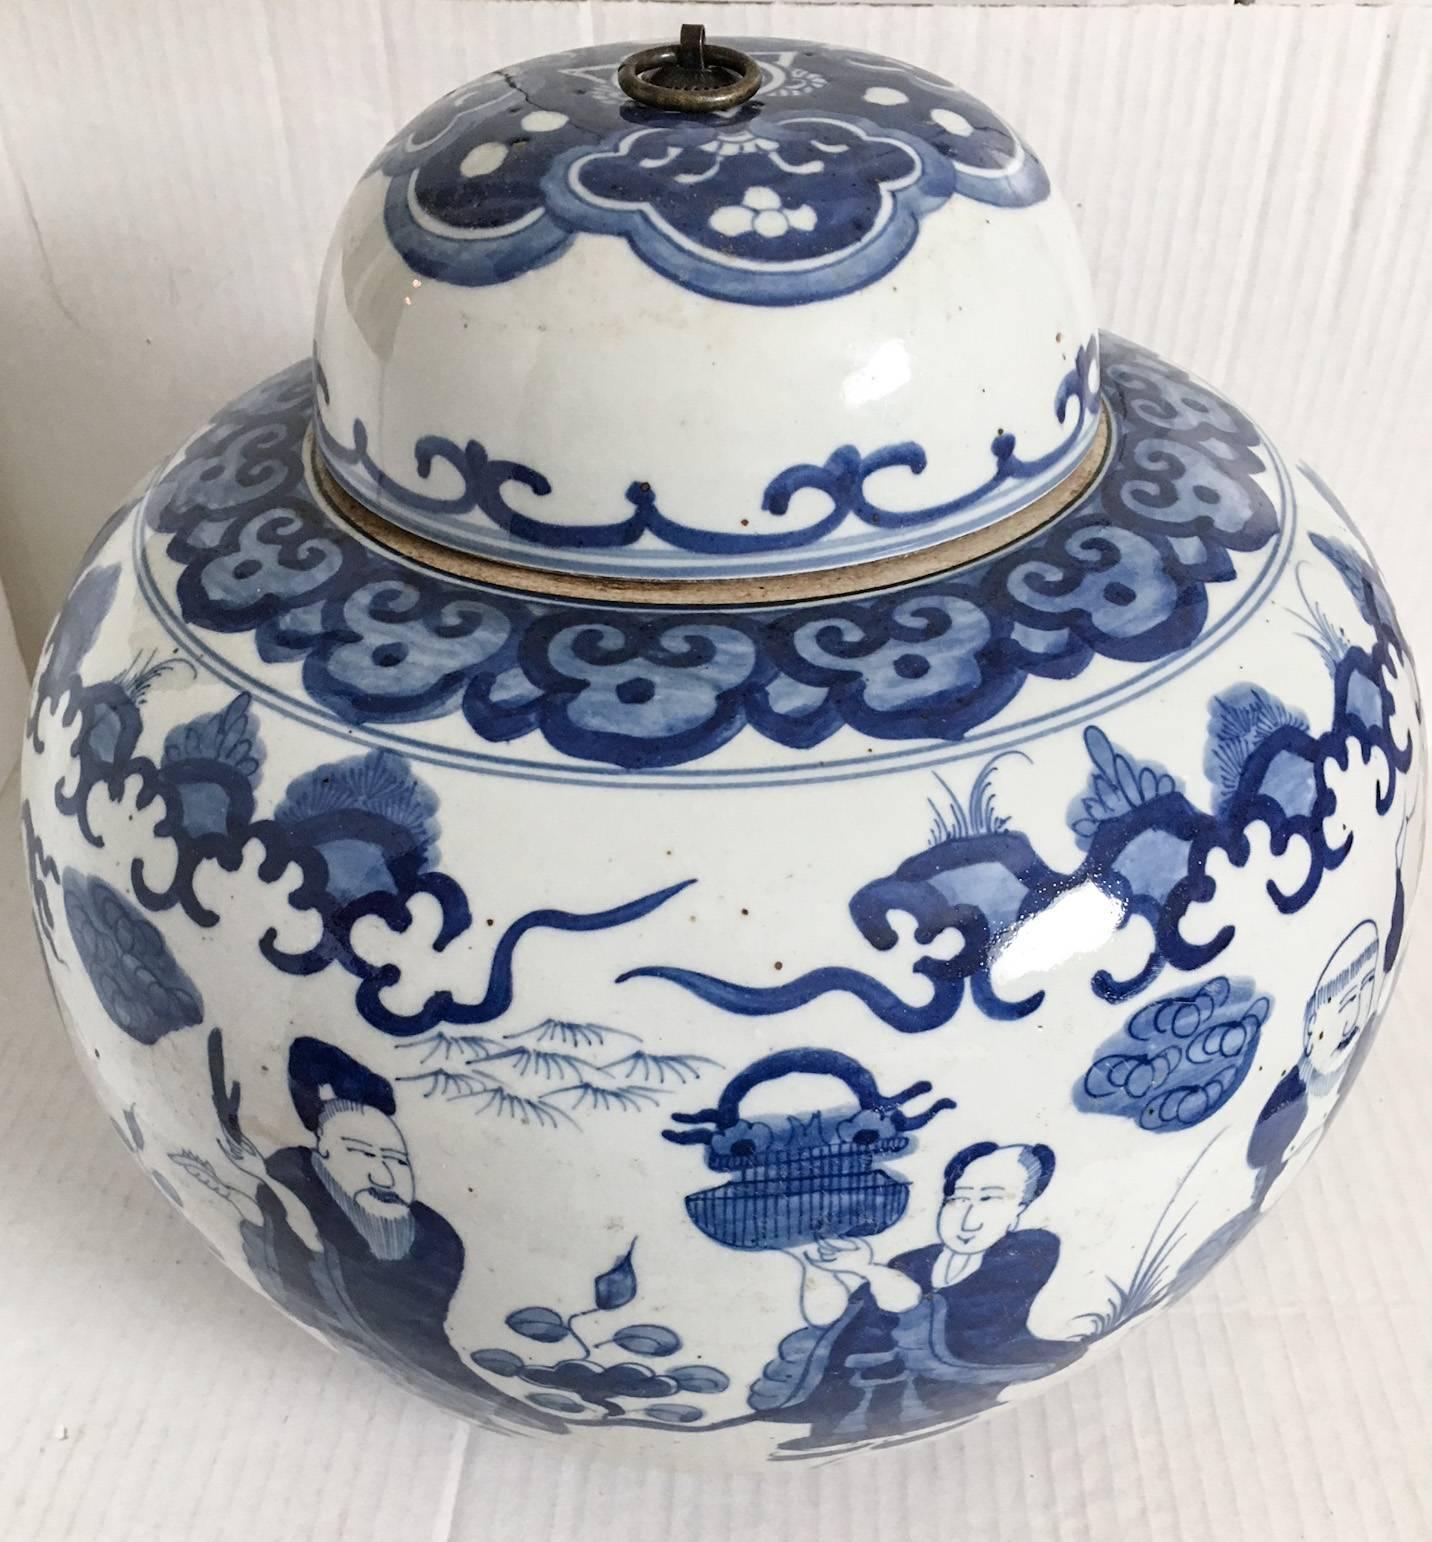 Beyond fabulous large and heavy blue and white Chinese stoneware ginger jar with a metal ring handle on the lid. One of two.